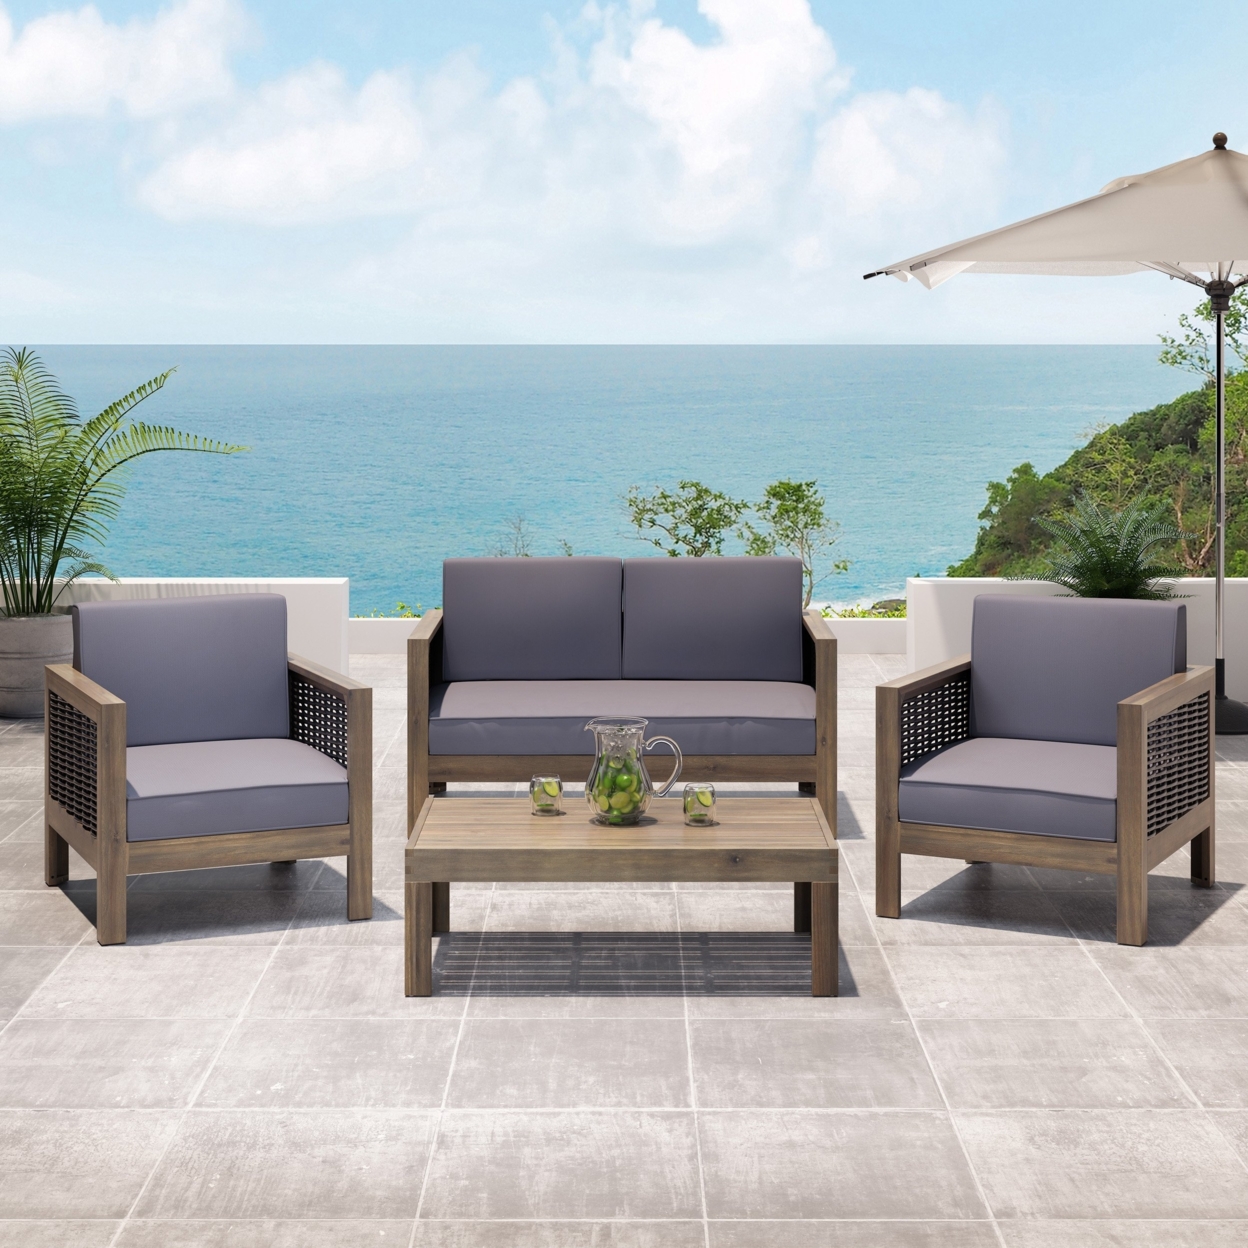 Mayes Outdoor 4 Seater Acacia Wood Chat Set With Wicker Accents - Teak/mixed Brown/beige